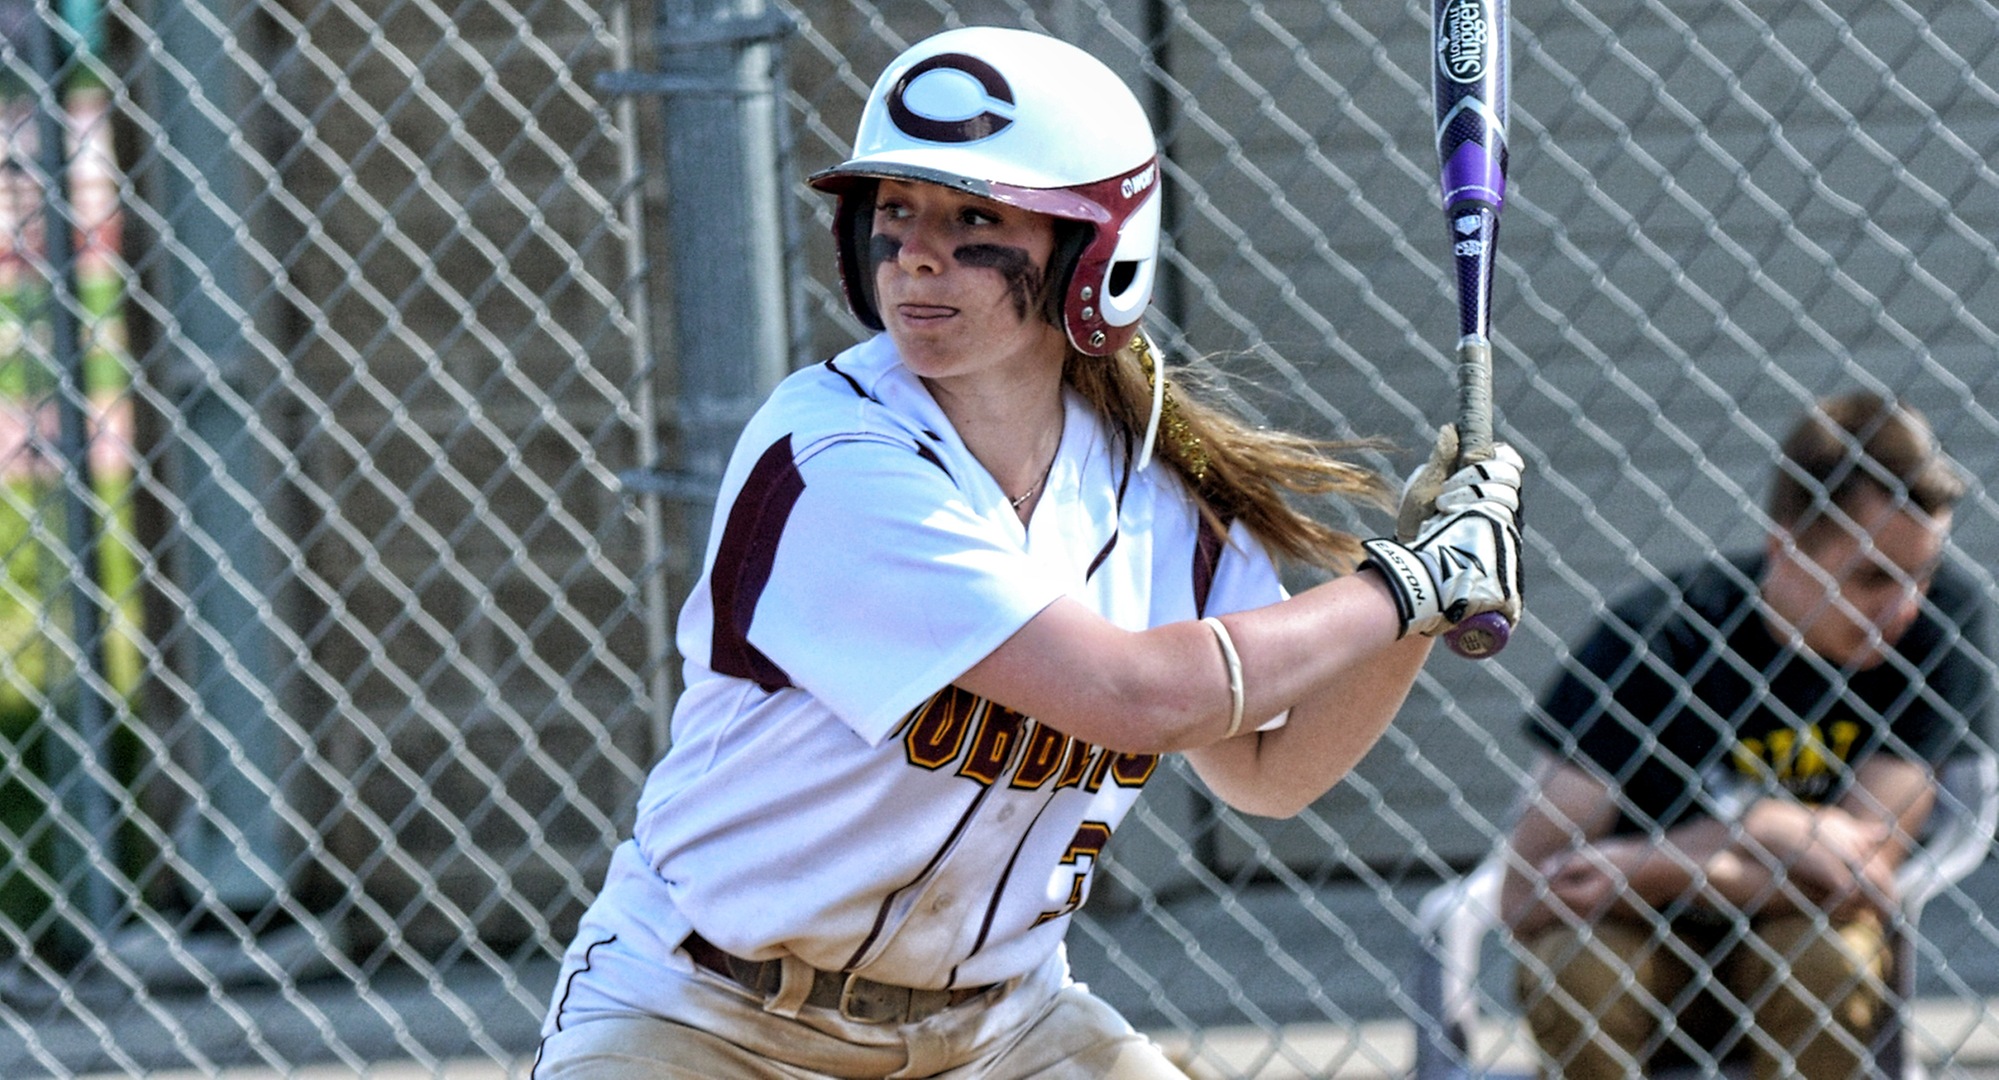 Senior Kayla Nack went 2-for-3 in the second game vs. Bethel. She was 4-for-12 in the four games over the weekend.